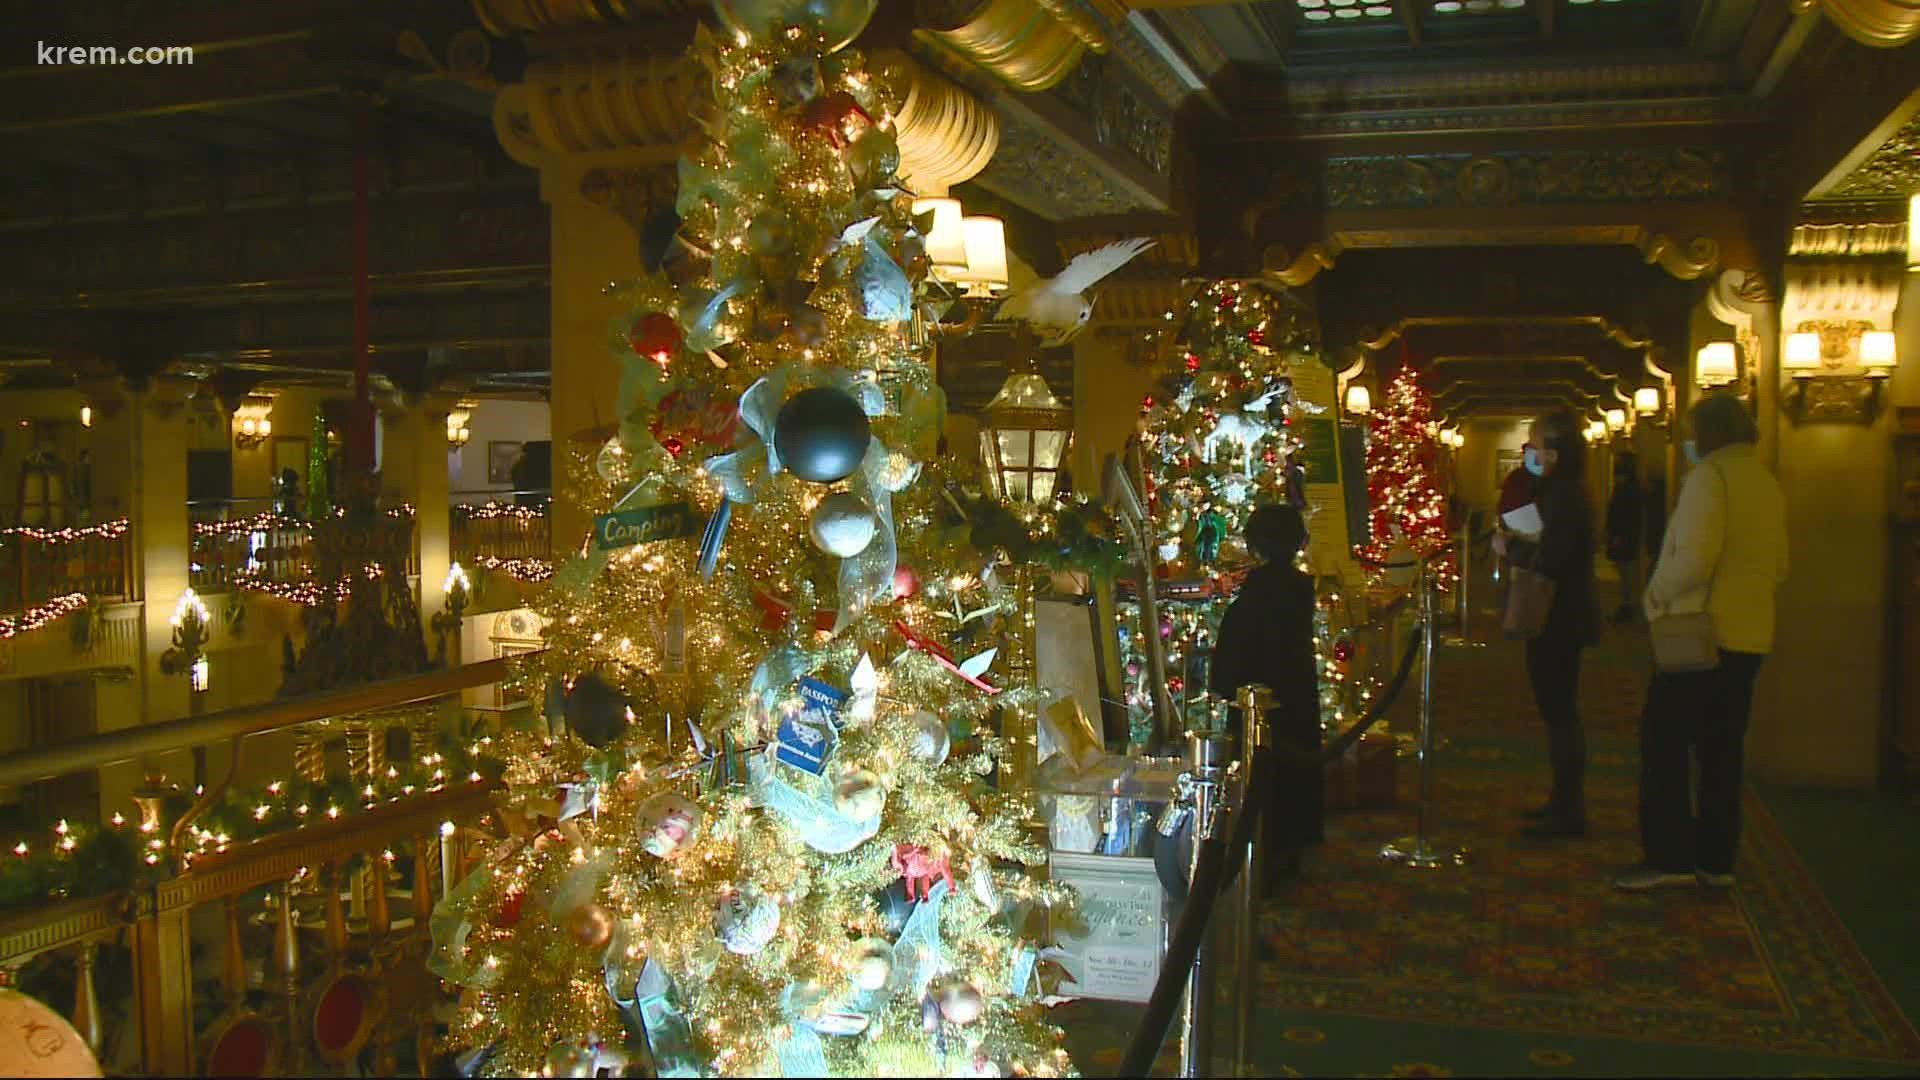 KREM 2 News visited the Davenport to get a sneak peak at this year's Christmas tree elegance.